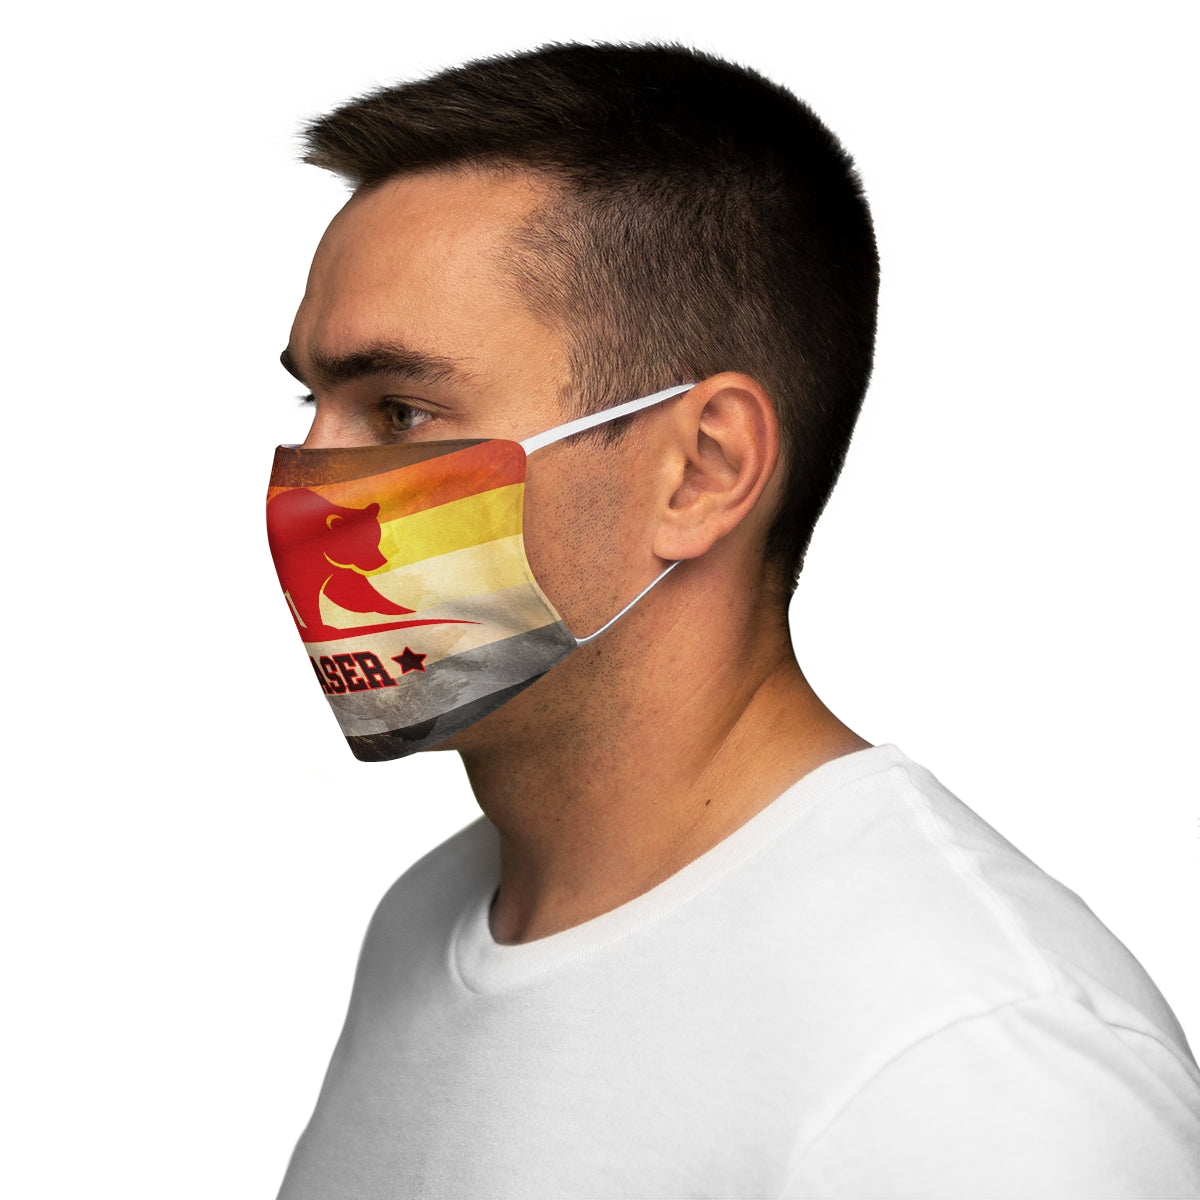 Bear Chaser Snug-Fit Polyester/Cotton Face Mask